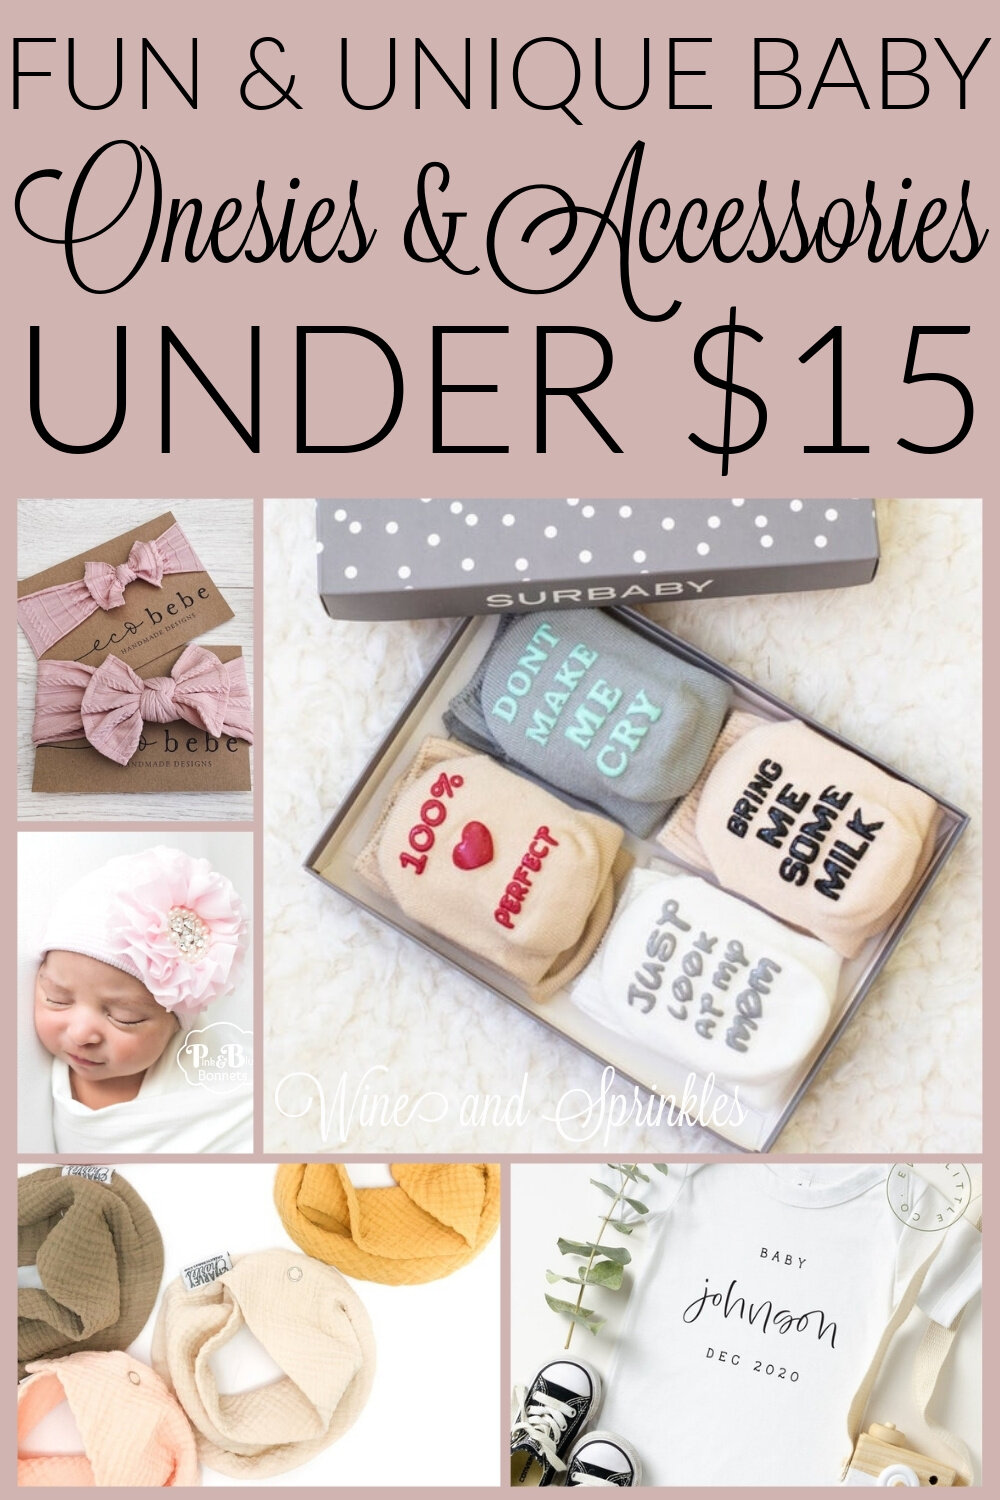 gispende Skynd dig økologisk 25 Cheap and Unique Baby Onesies and Wardrobe Accessories Under $15 — Wine  & Sprinkles